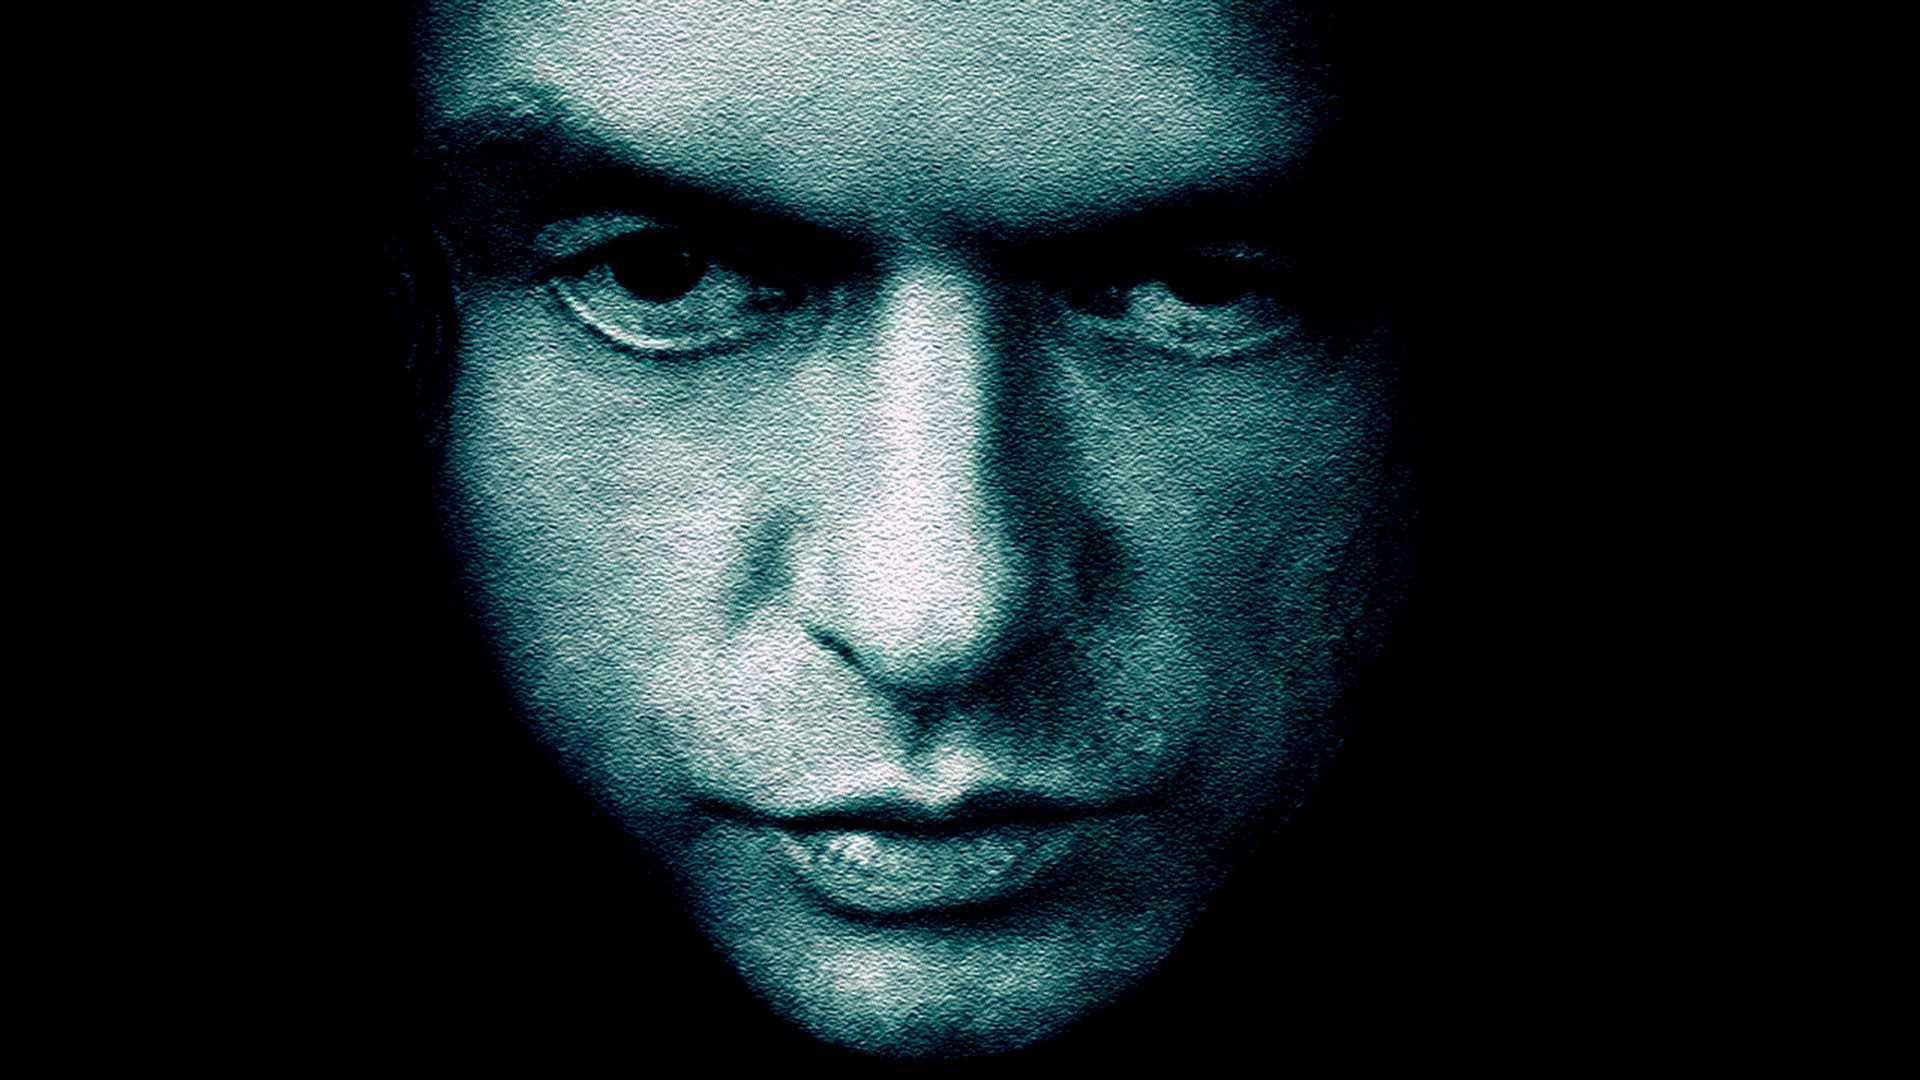 EXCLUSIVE INTERVIEW: Tearing It Apart: A Conversation With Tommy Wiseau